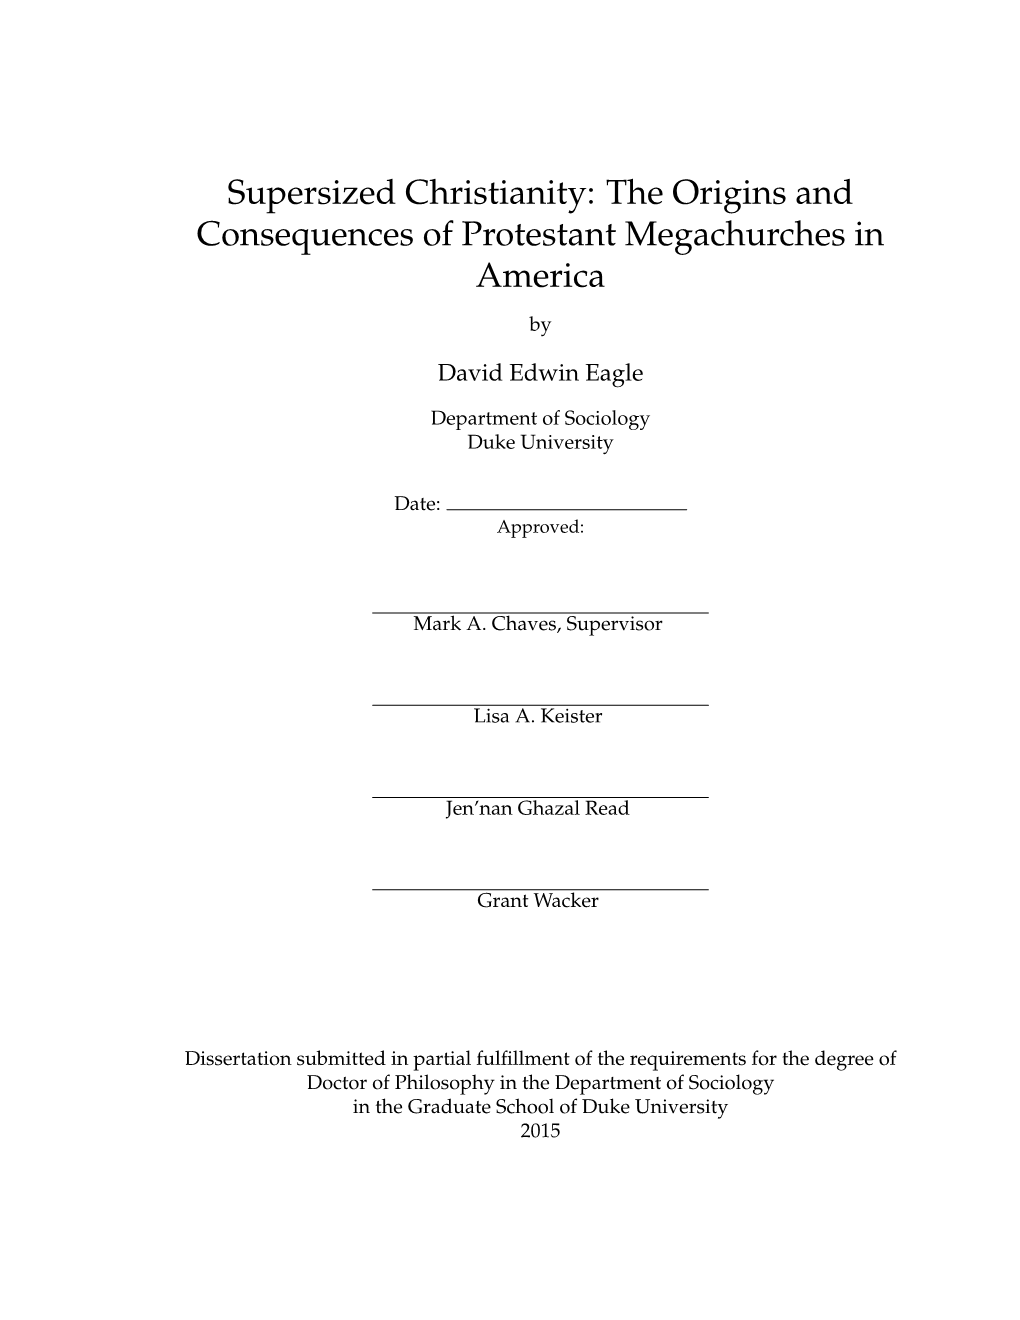 Supersized Christianity: the Origins and Consequences of Protestant Megachurches in America